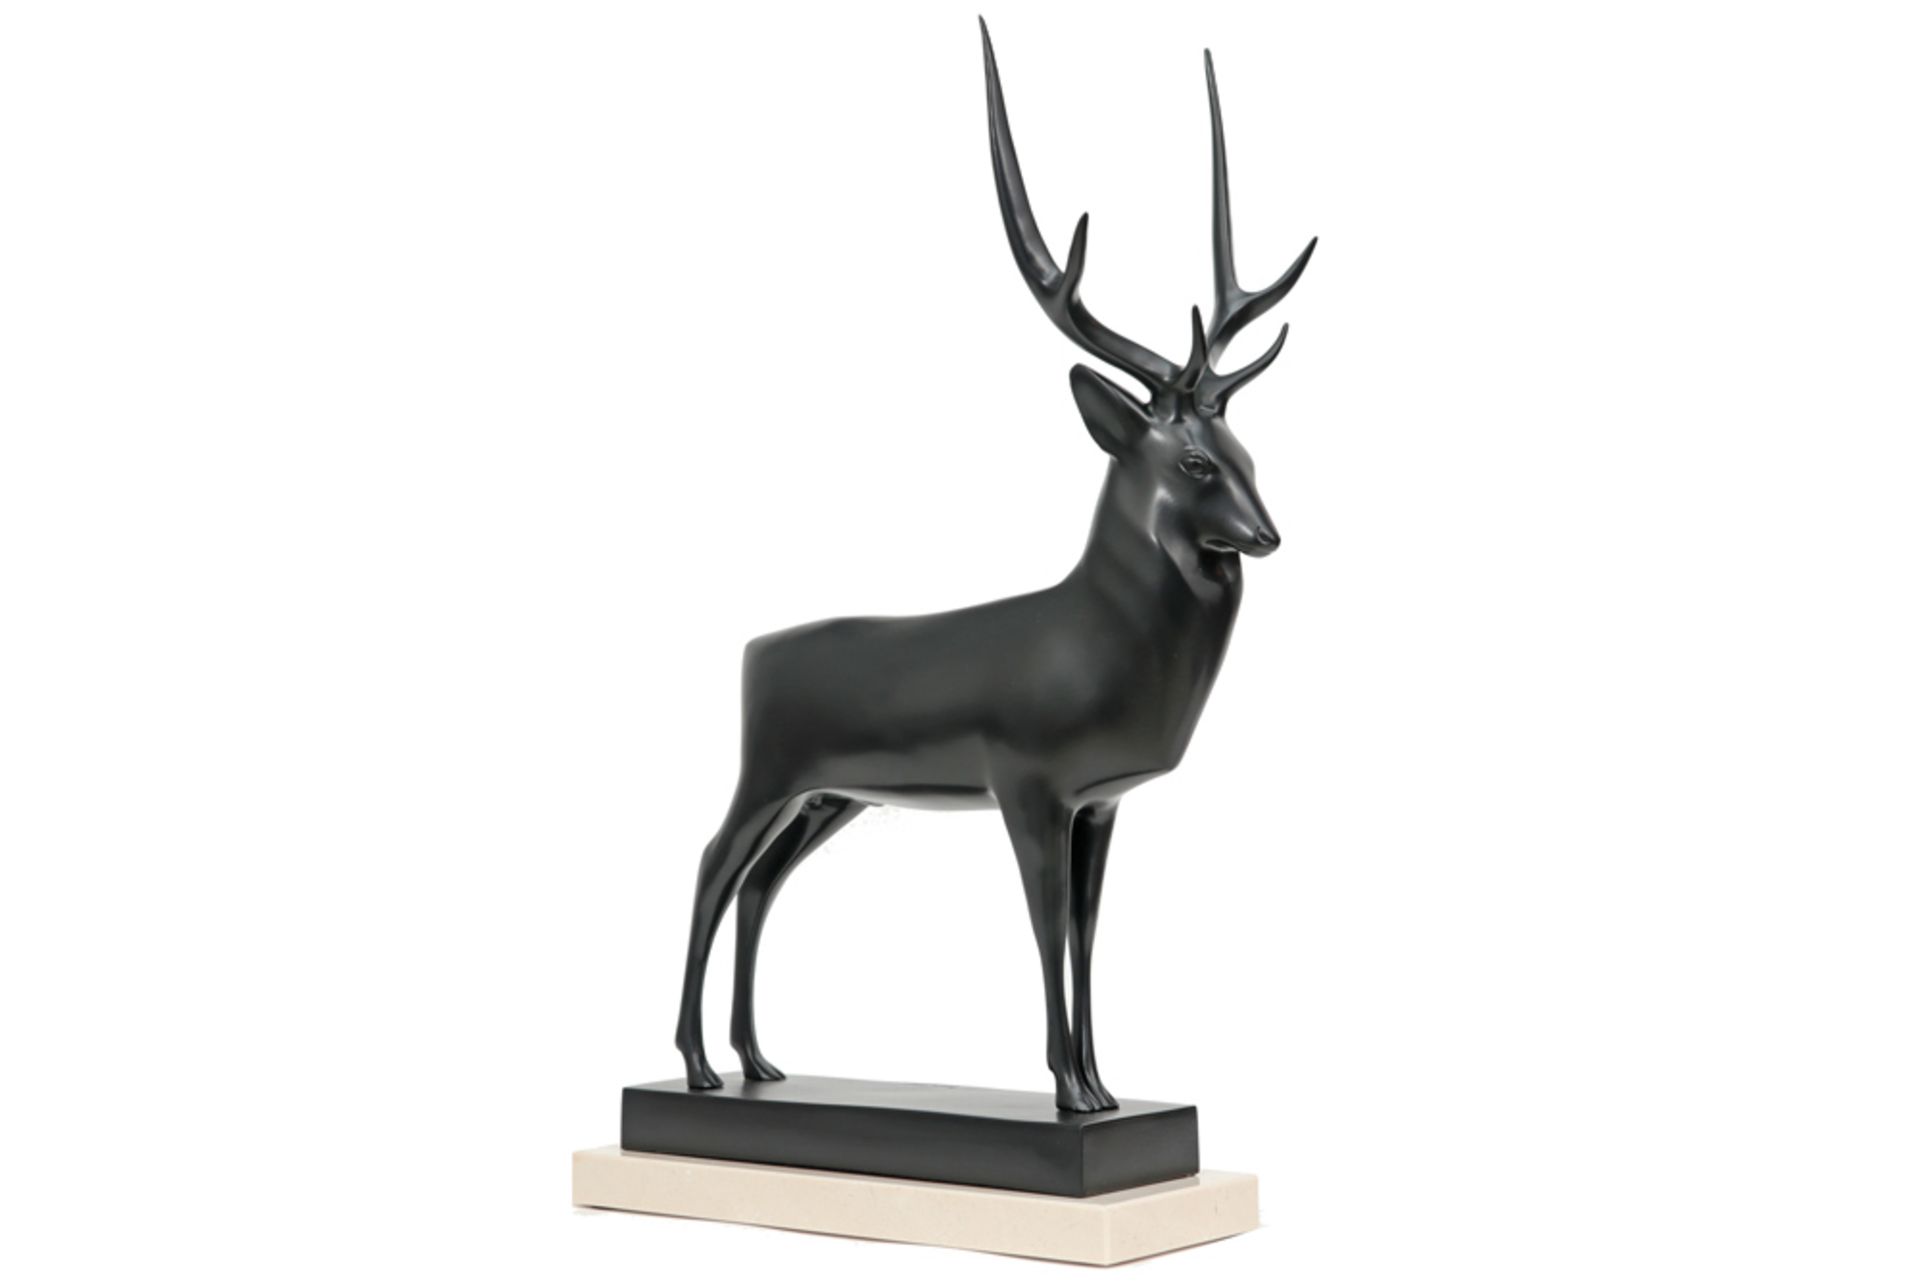 François Pompon posthumous cast "Big Deer" sculpture in bronze on a marble base - with signature and